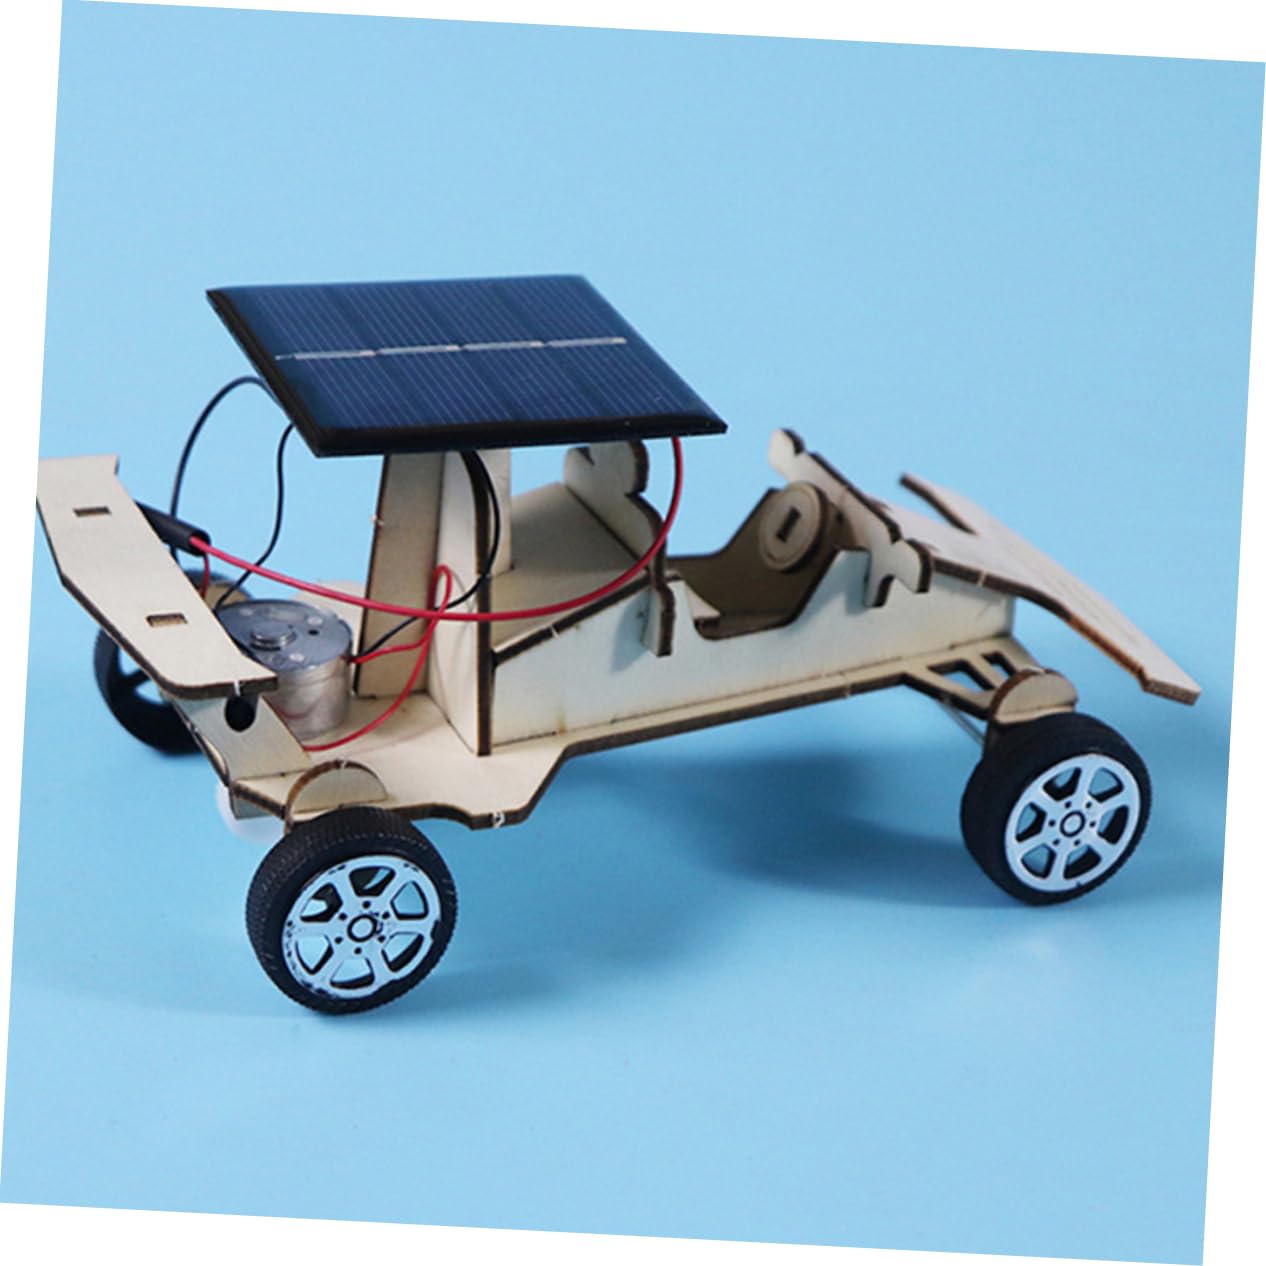 1 Set Assembled Car Toy Wooden Playset Cars Solar Model Car Building Science Kits for Kids Solar Car Kit Children Plaything Kids DIY Plaything Solar Energy Vehicle Pupils Puzzle